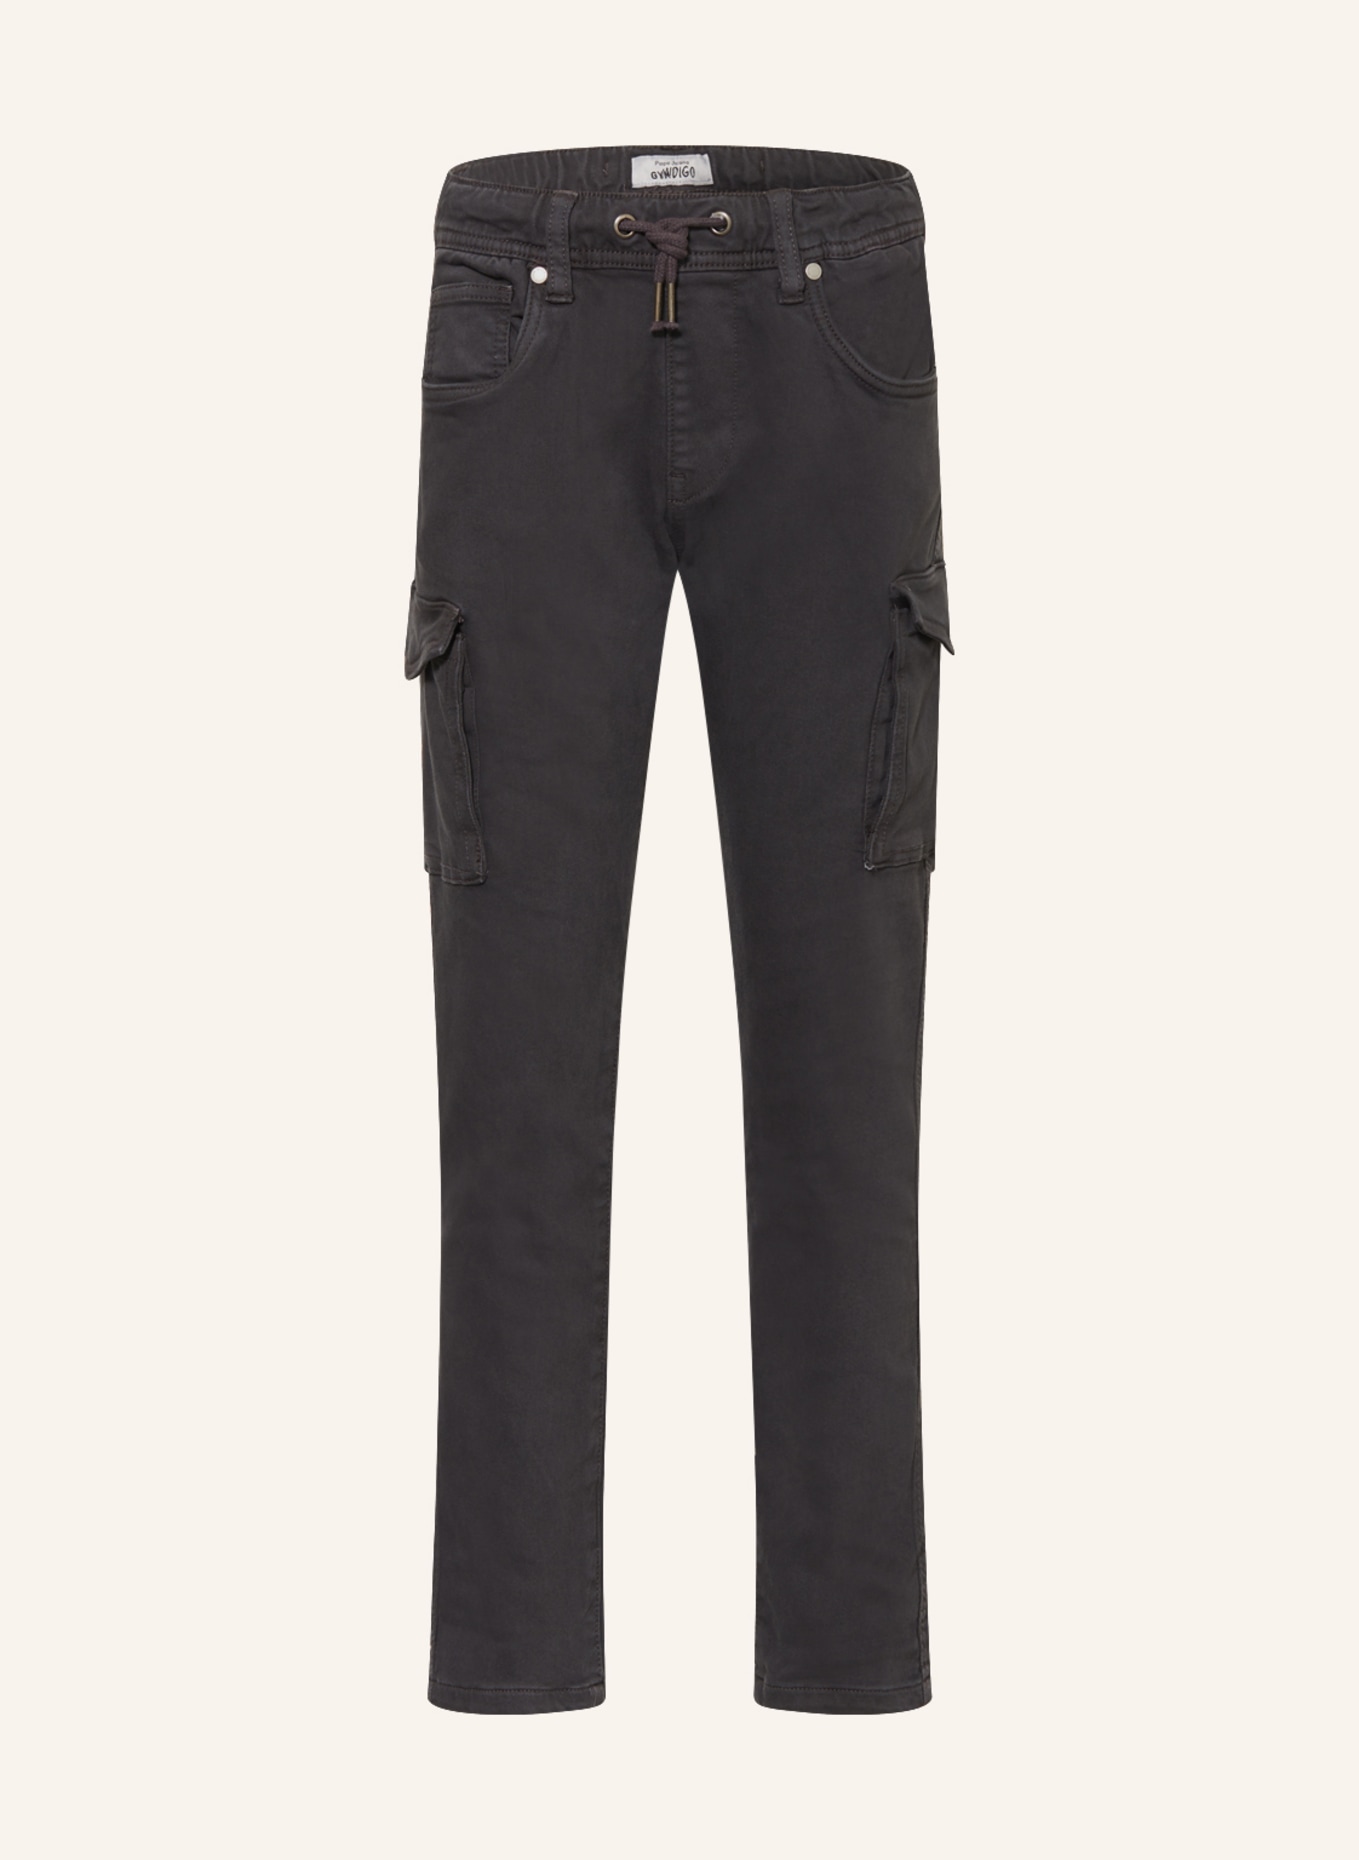 Pepe Jeans Cargohose CHARGO schwarz in CHASE